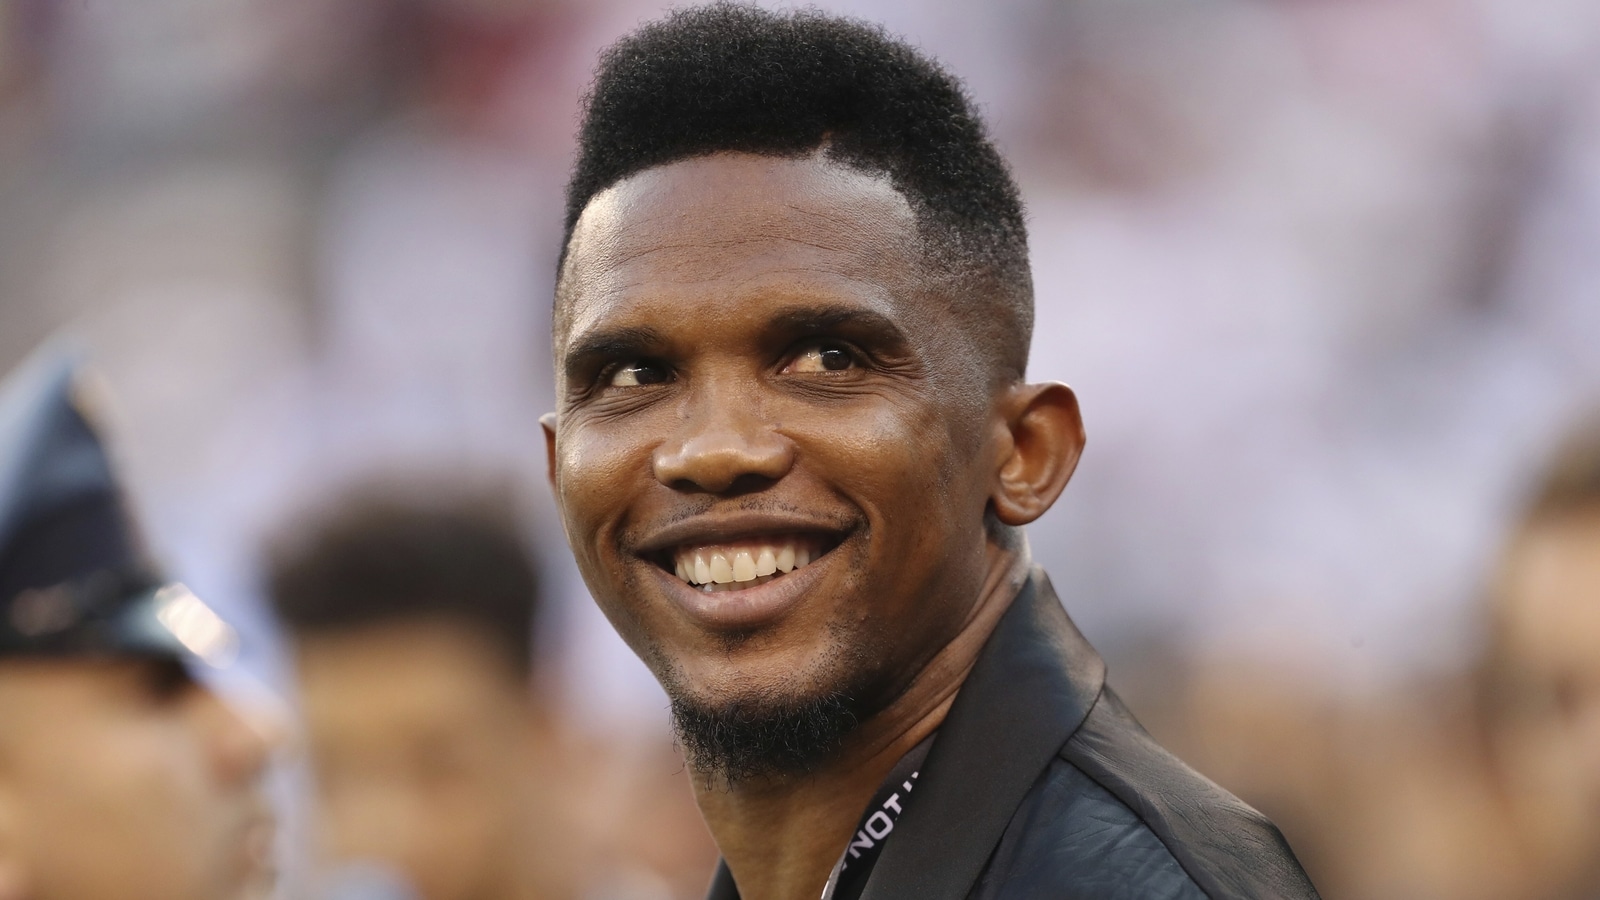 Ex-Cameroon striker Samuel Eto'o seen appearing to attack man at the World Cup 